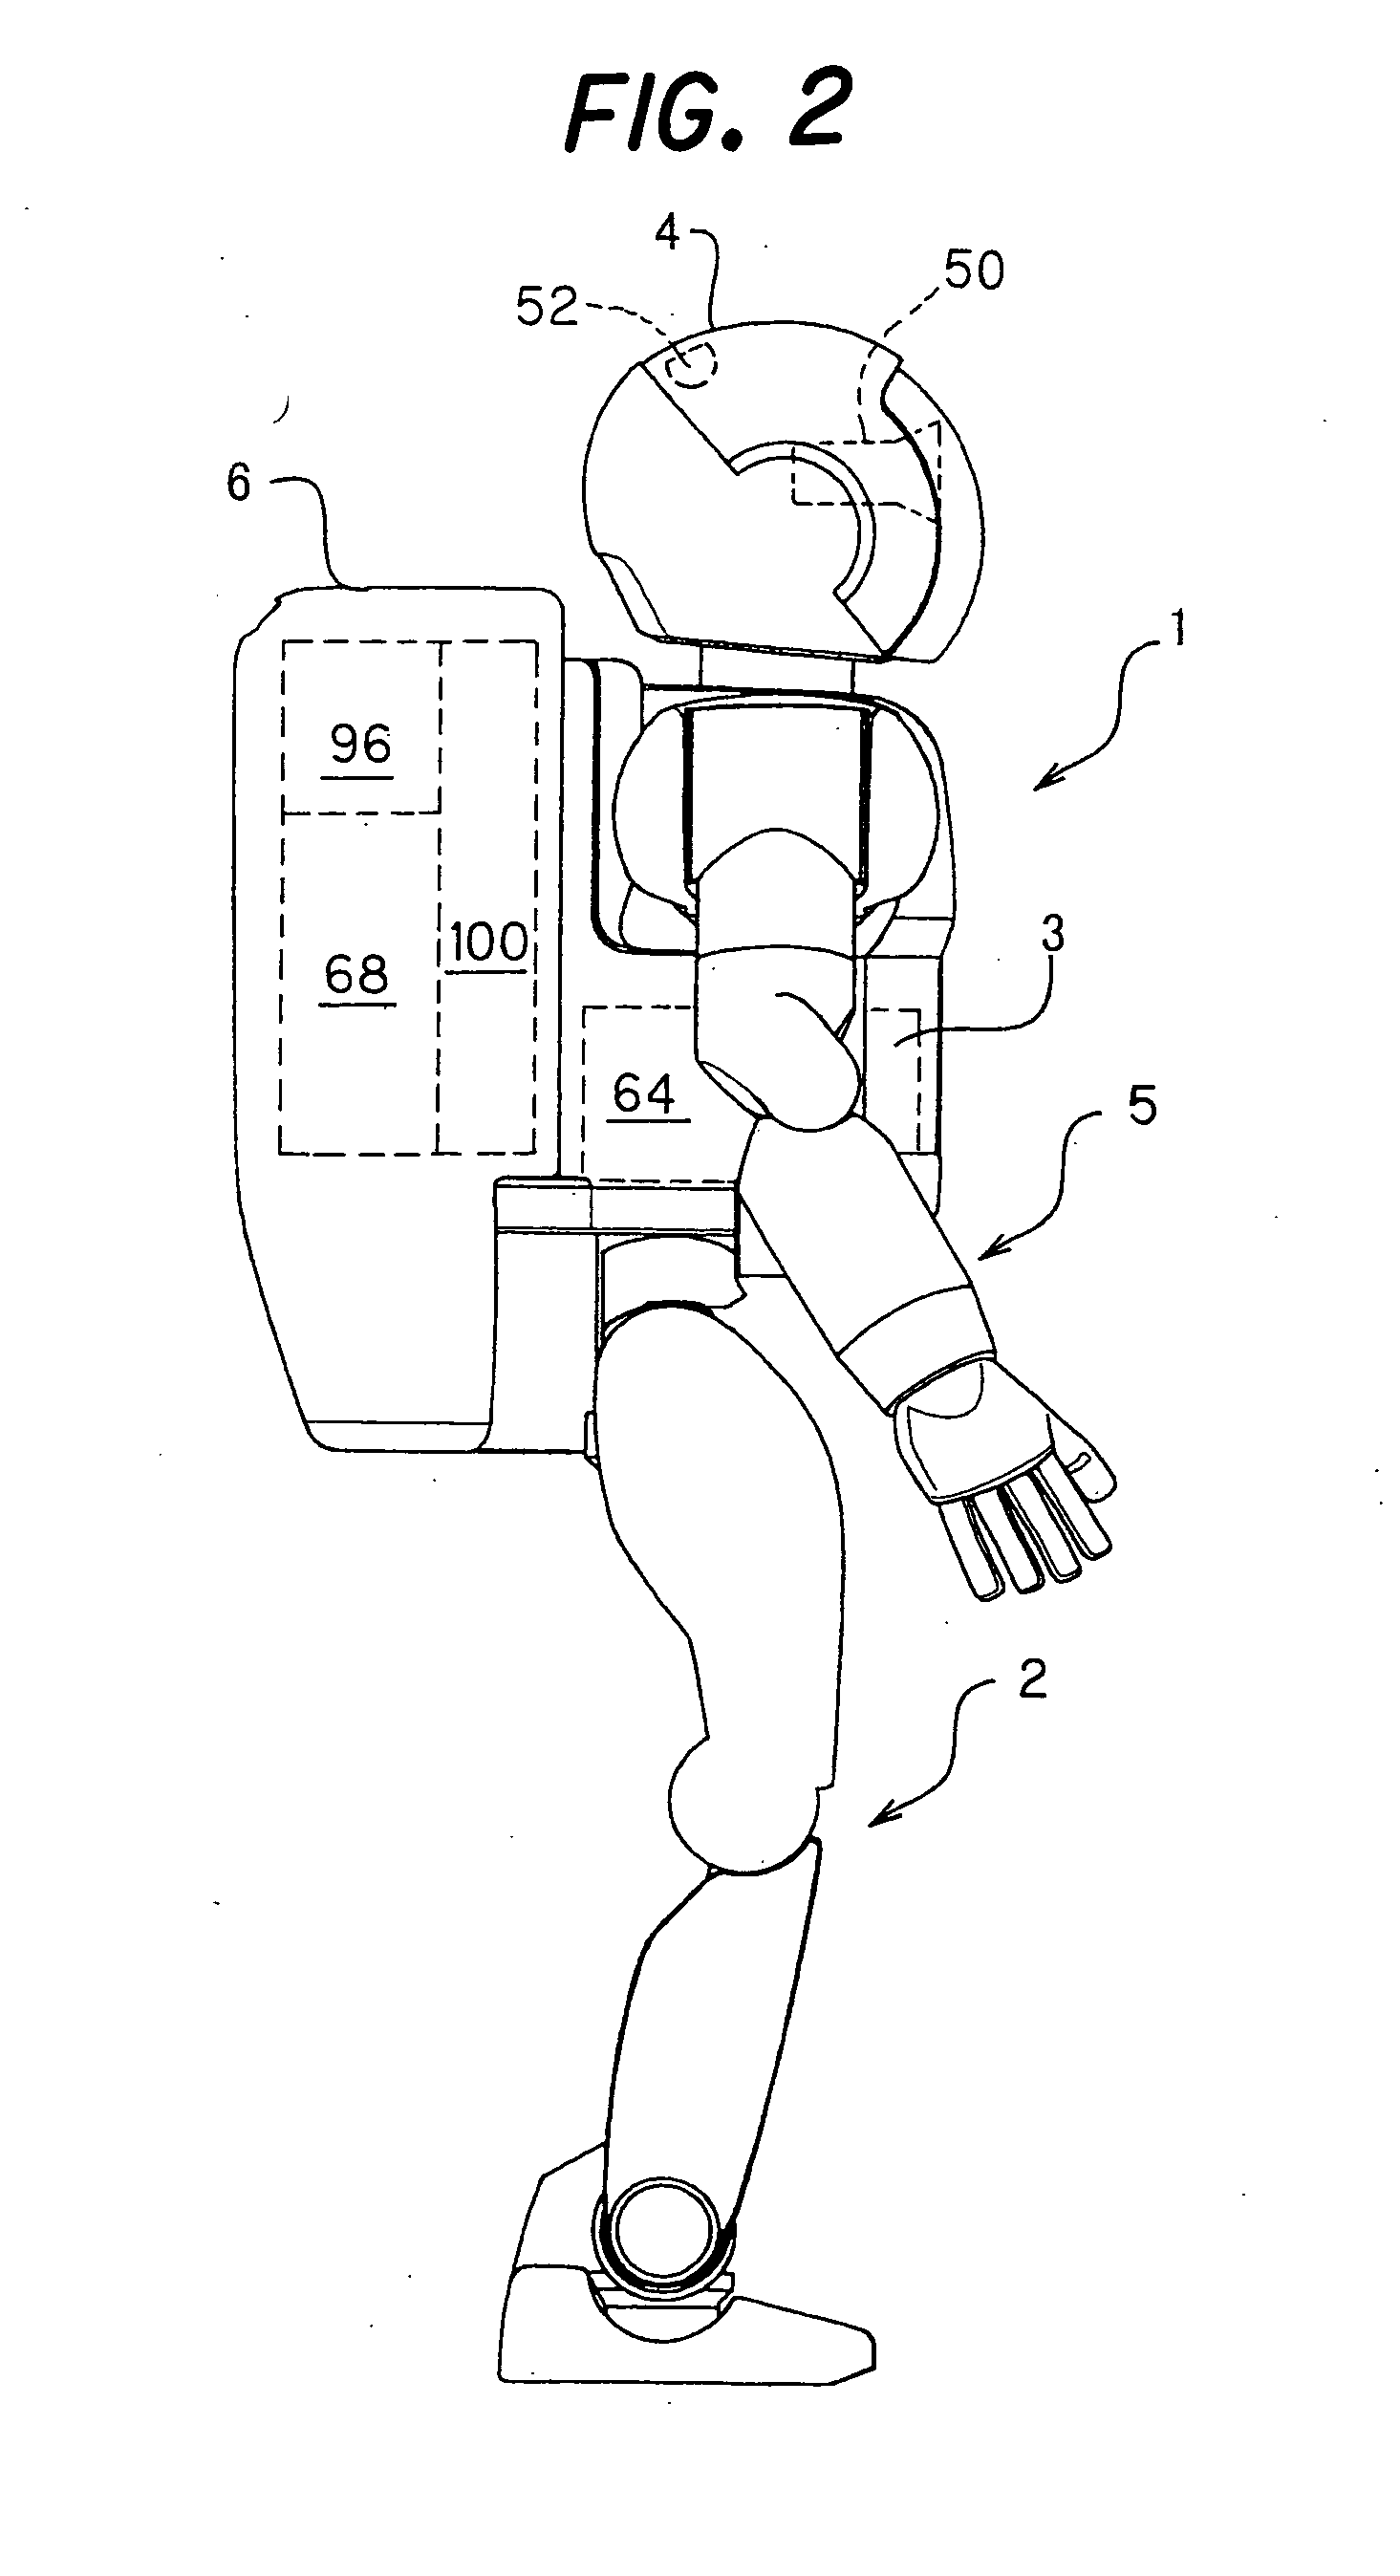 Abnormality detector of moving robot